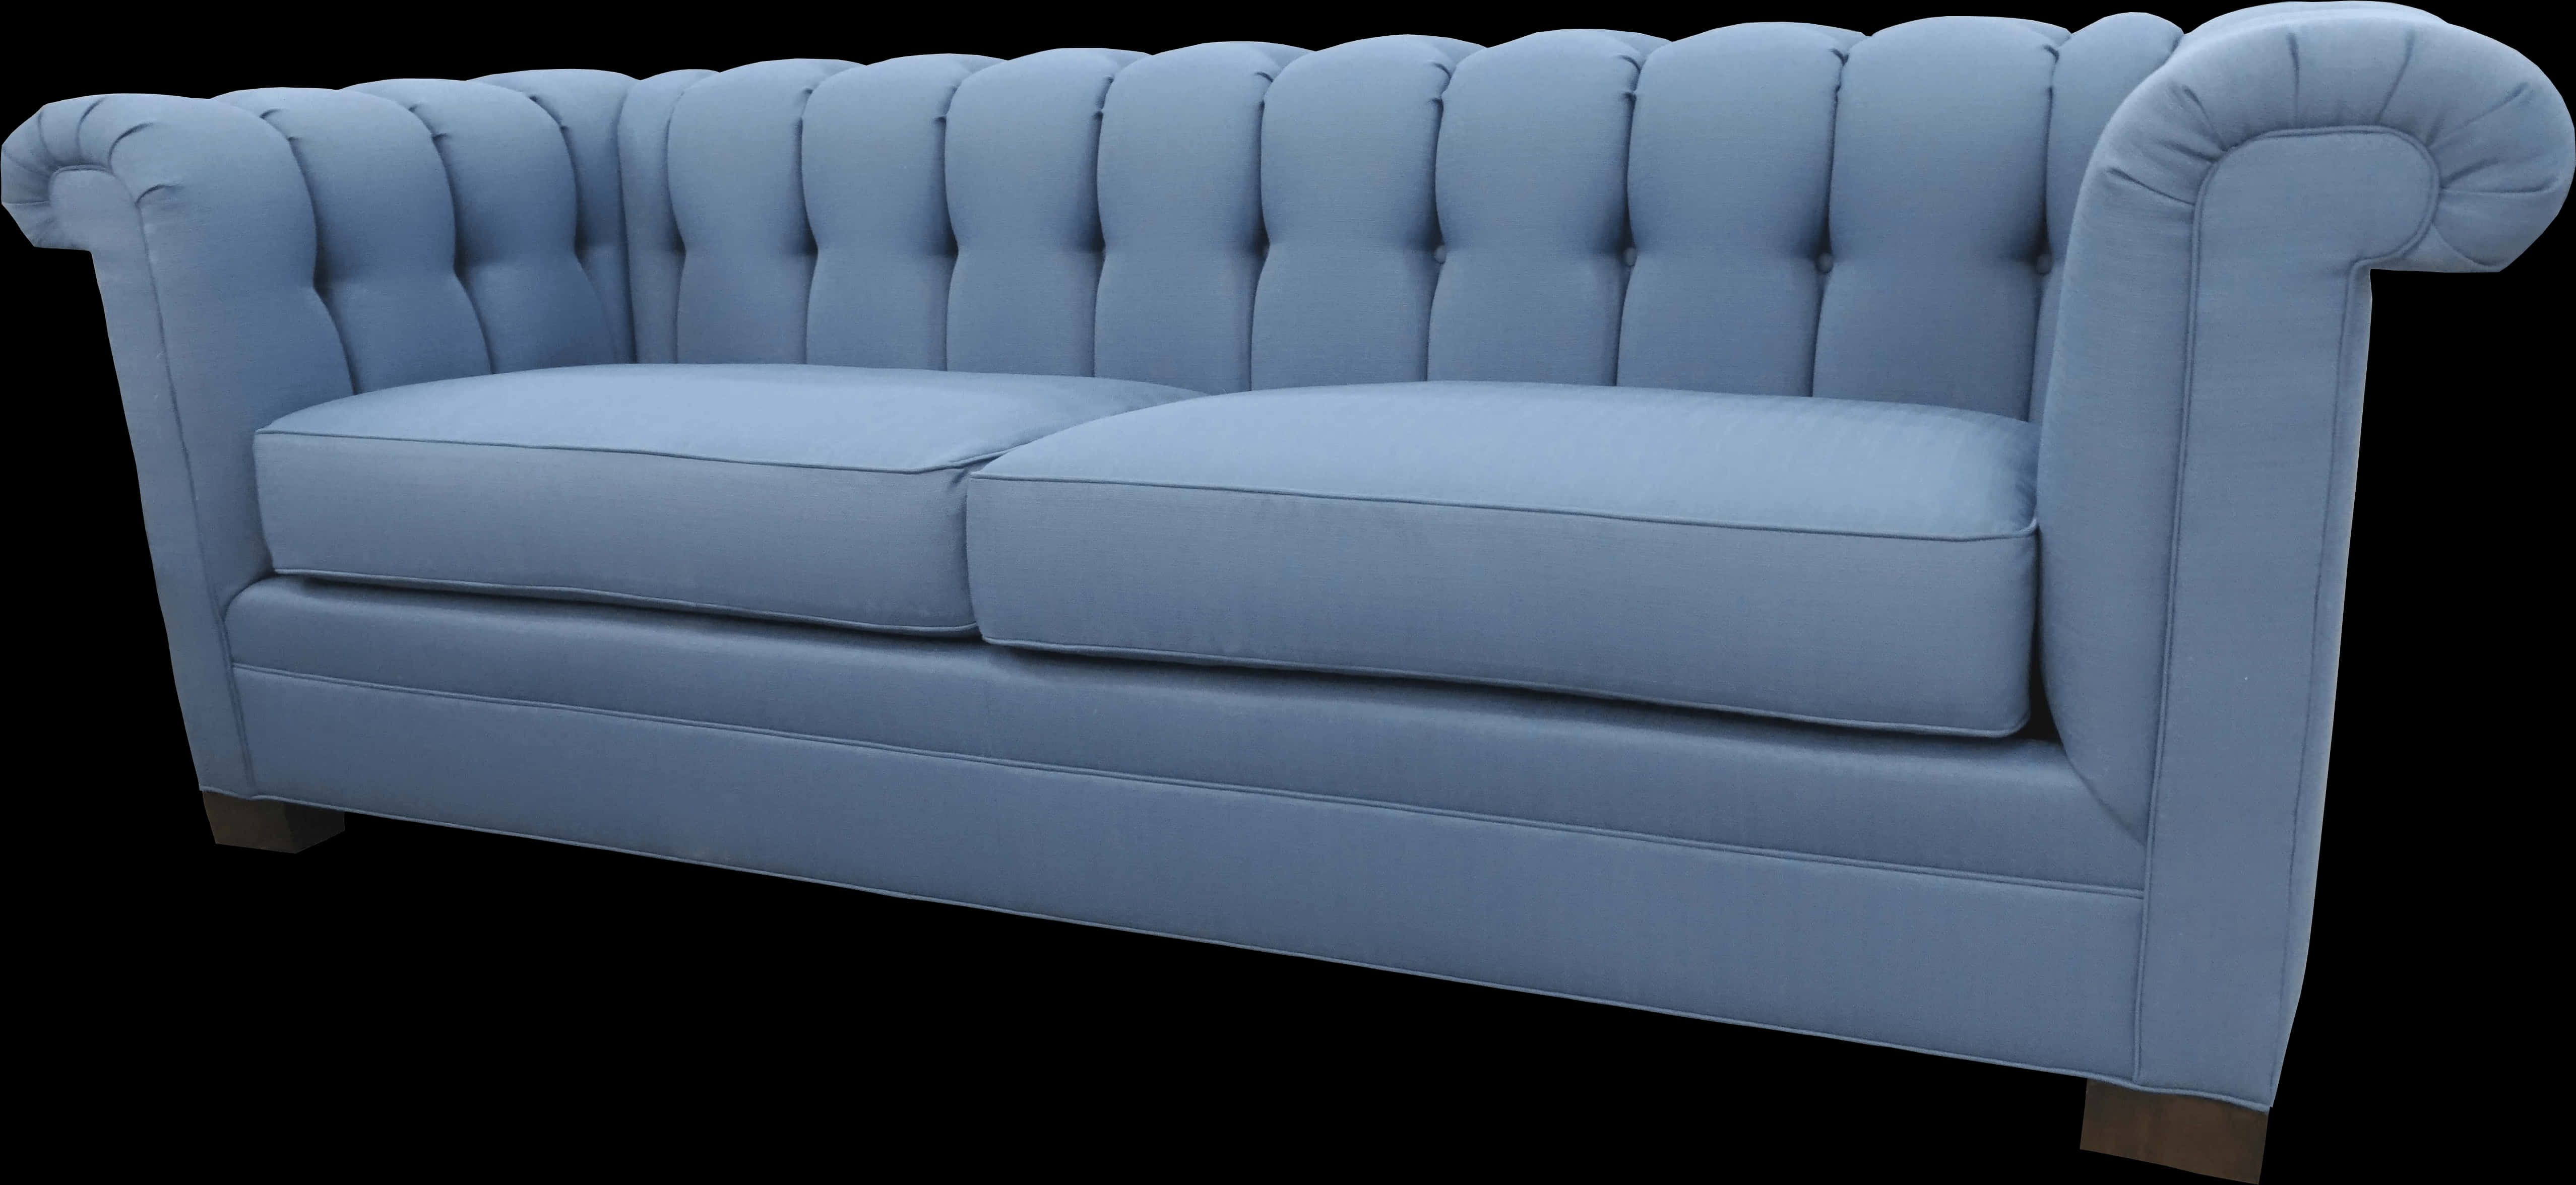 A Blue Couch With A Black Background